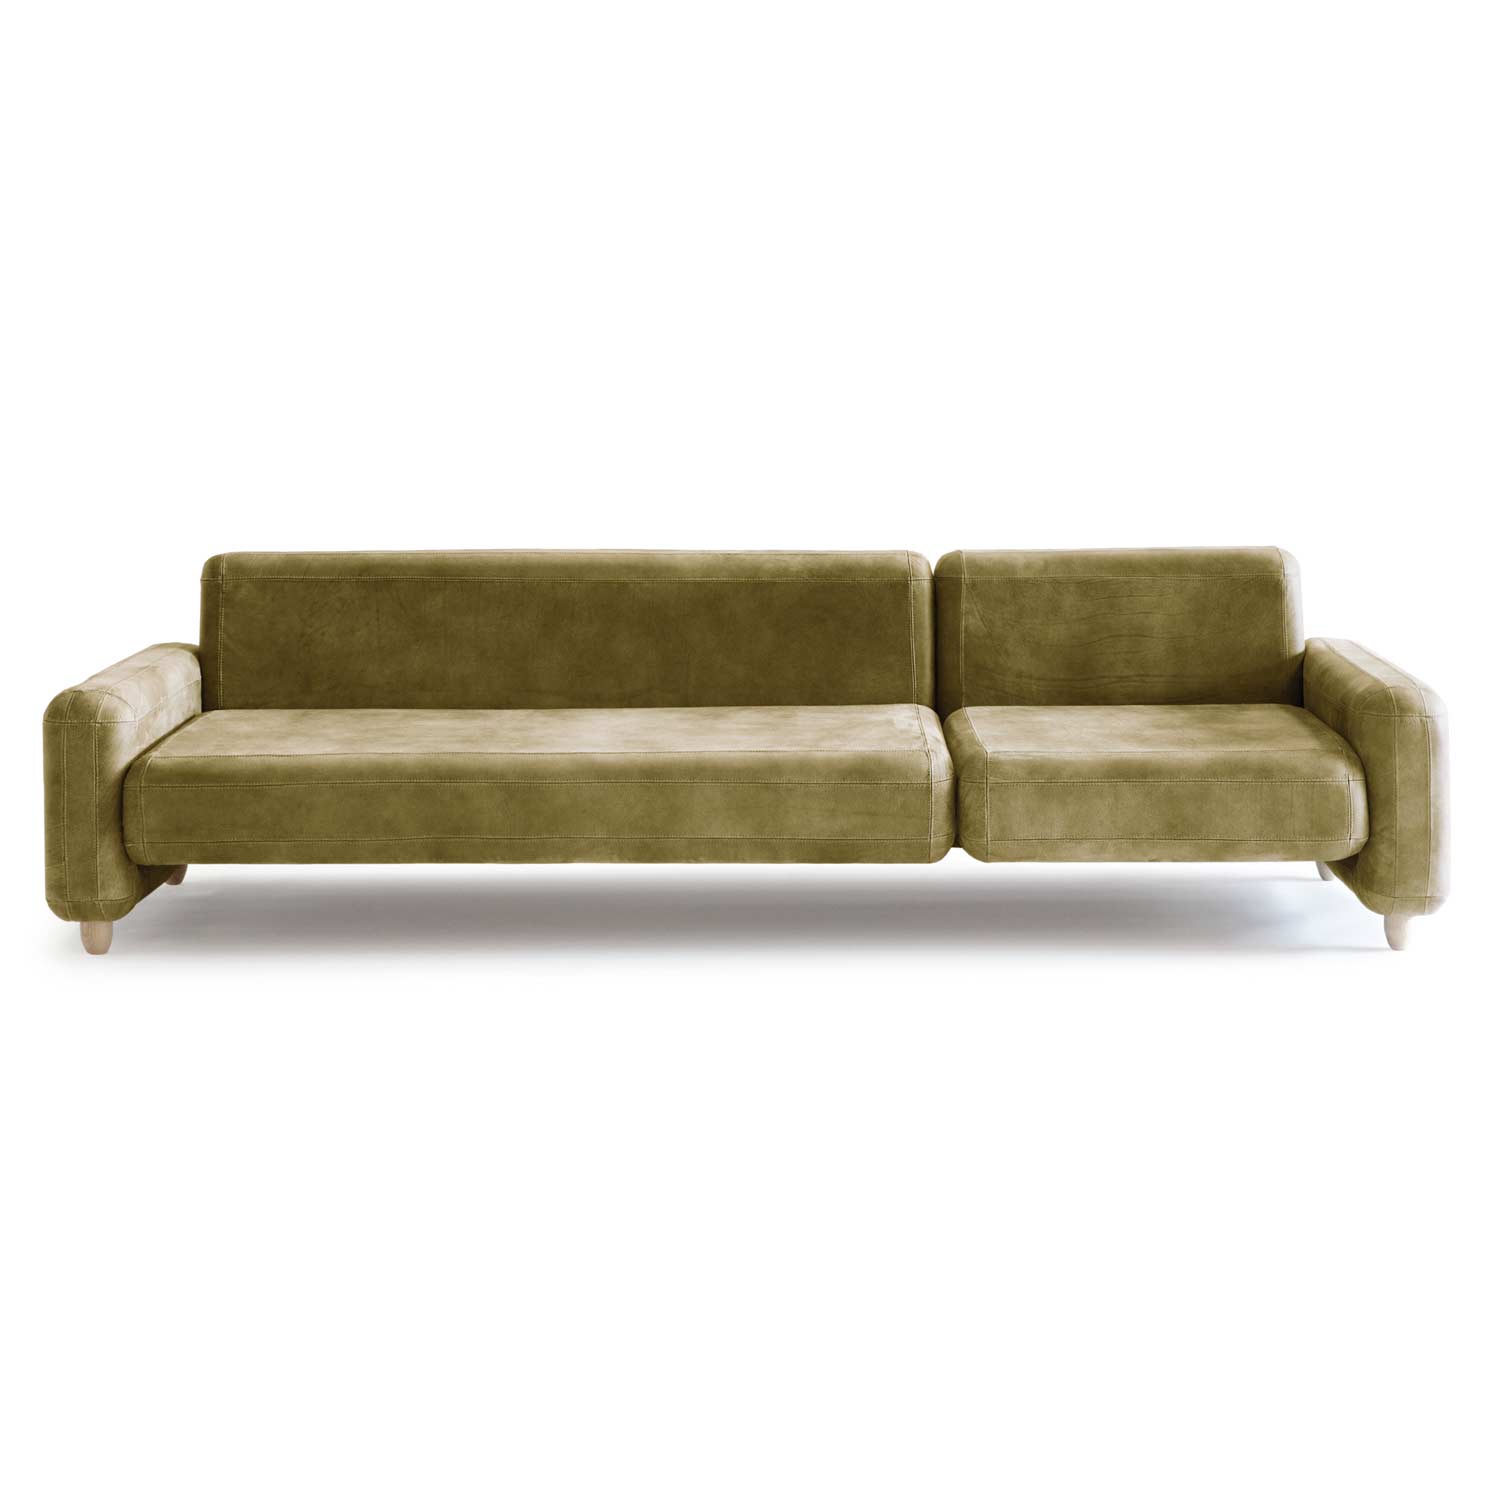 Commercial and Residential Elegance, beige leather sofa